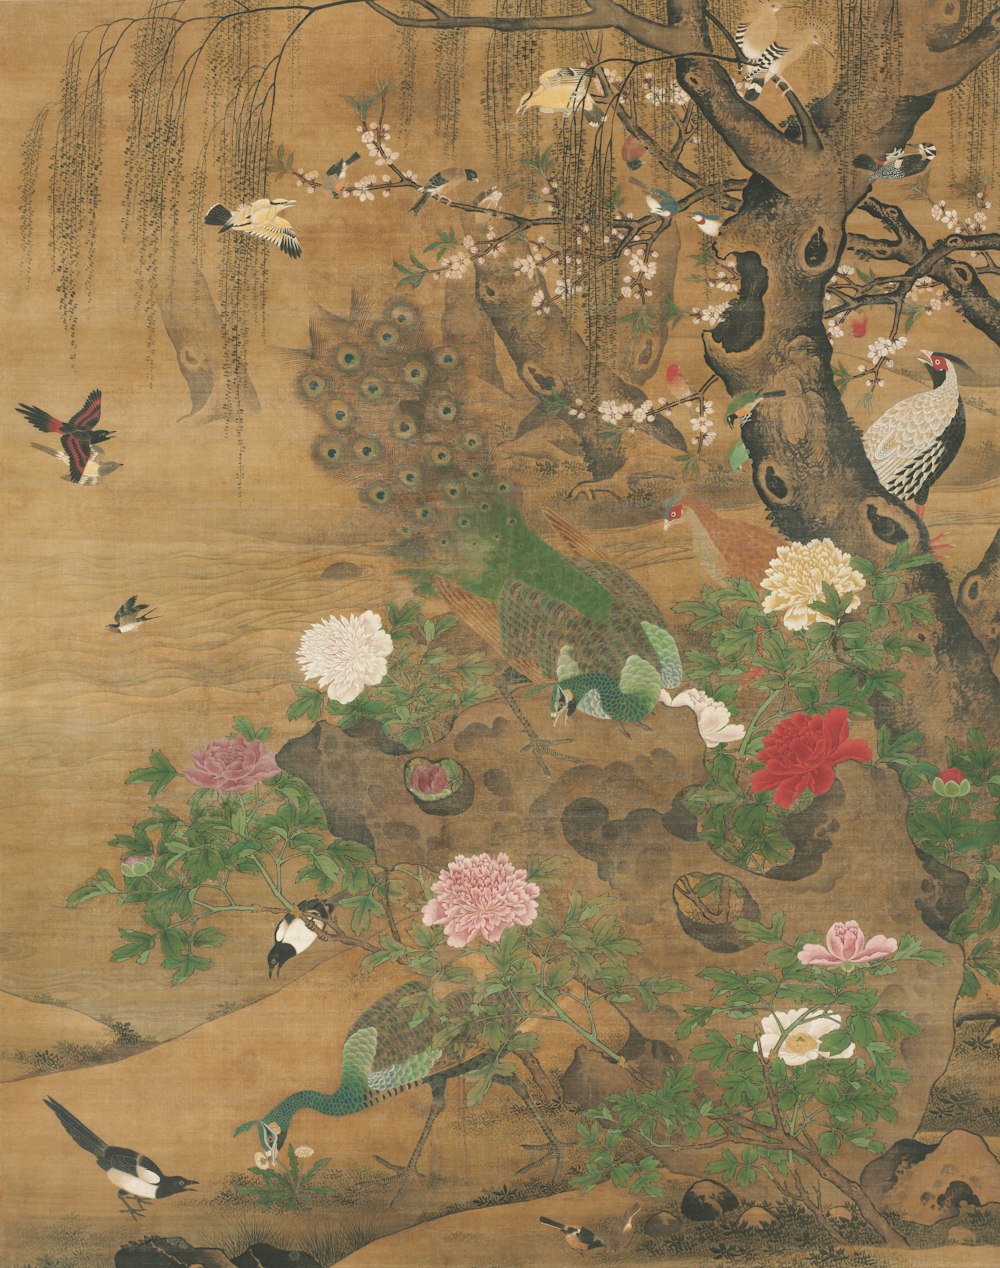 a painting of birds, flowers, and a tree